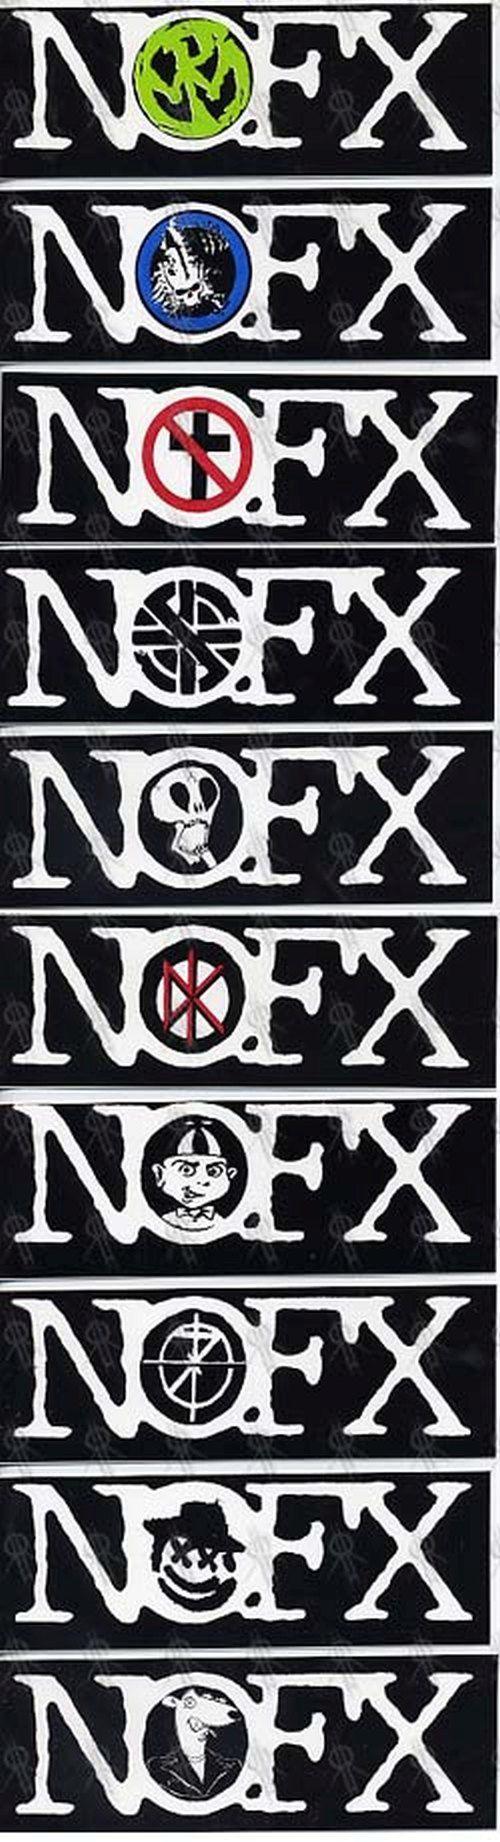 Other Band Logo - NOFX - 'Logo With Other Band Logo' Designs Sticker (Miscellaneous ...